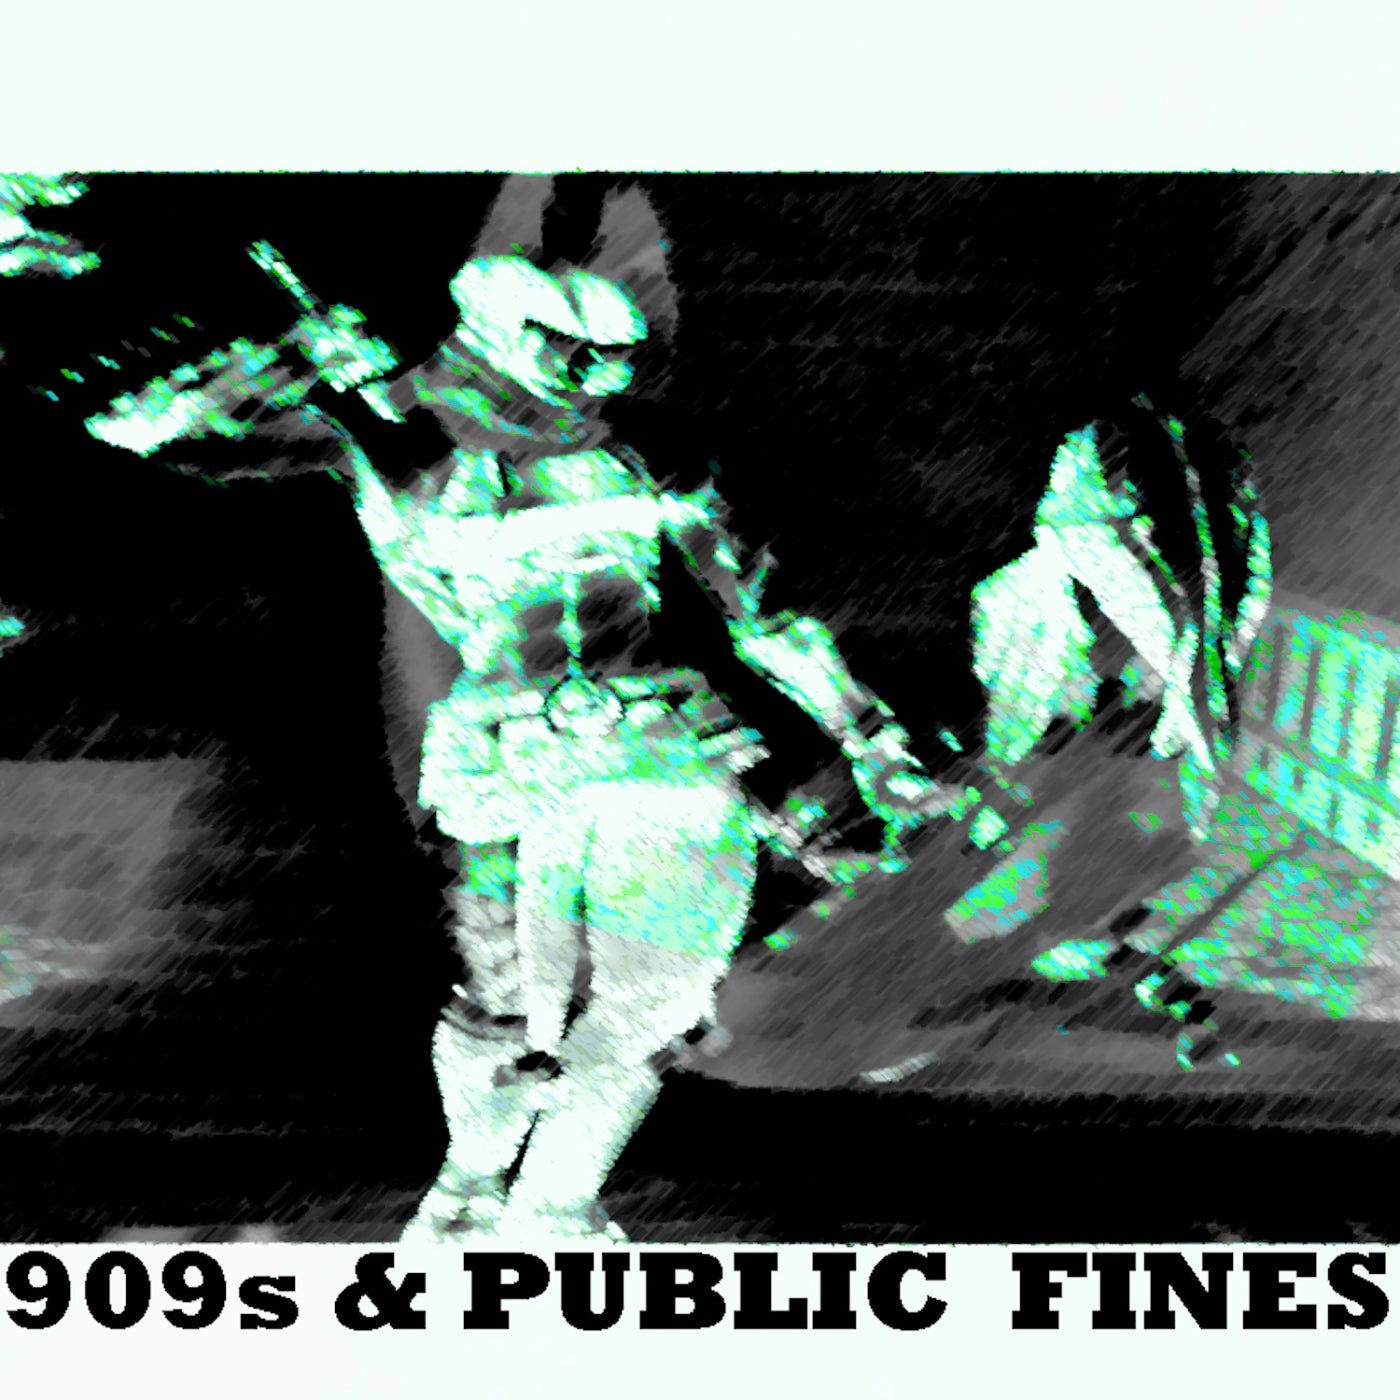 Download 909s & Public Fines on Electrobuzz